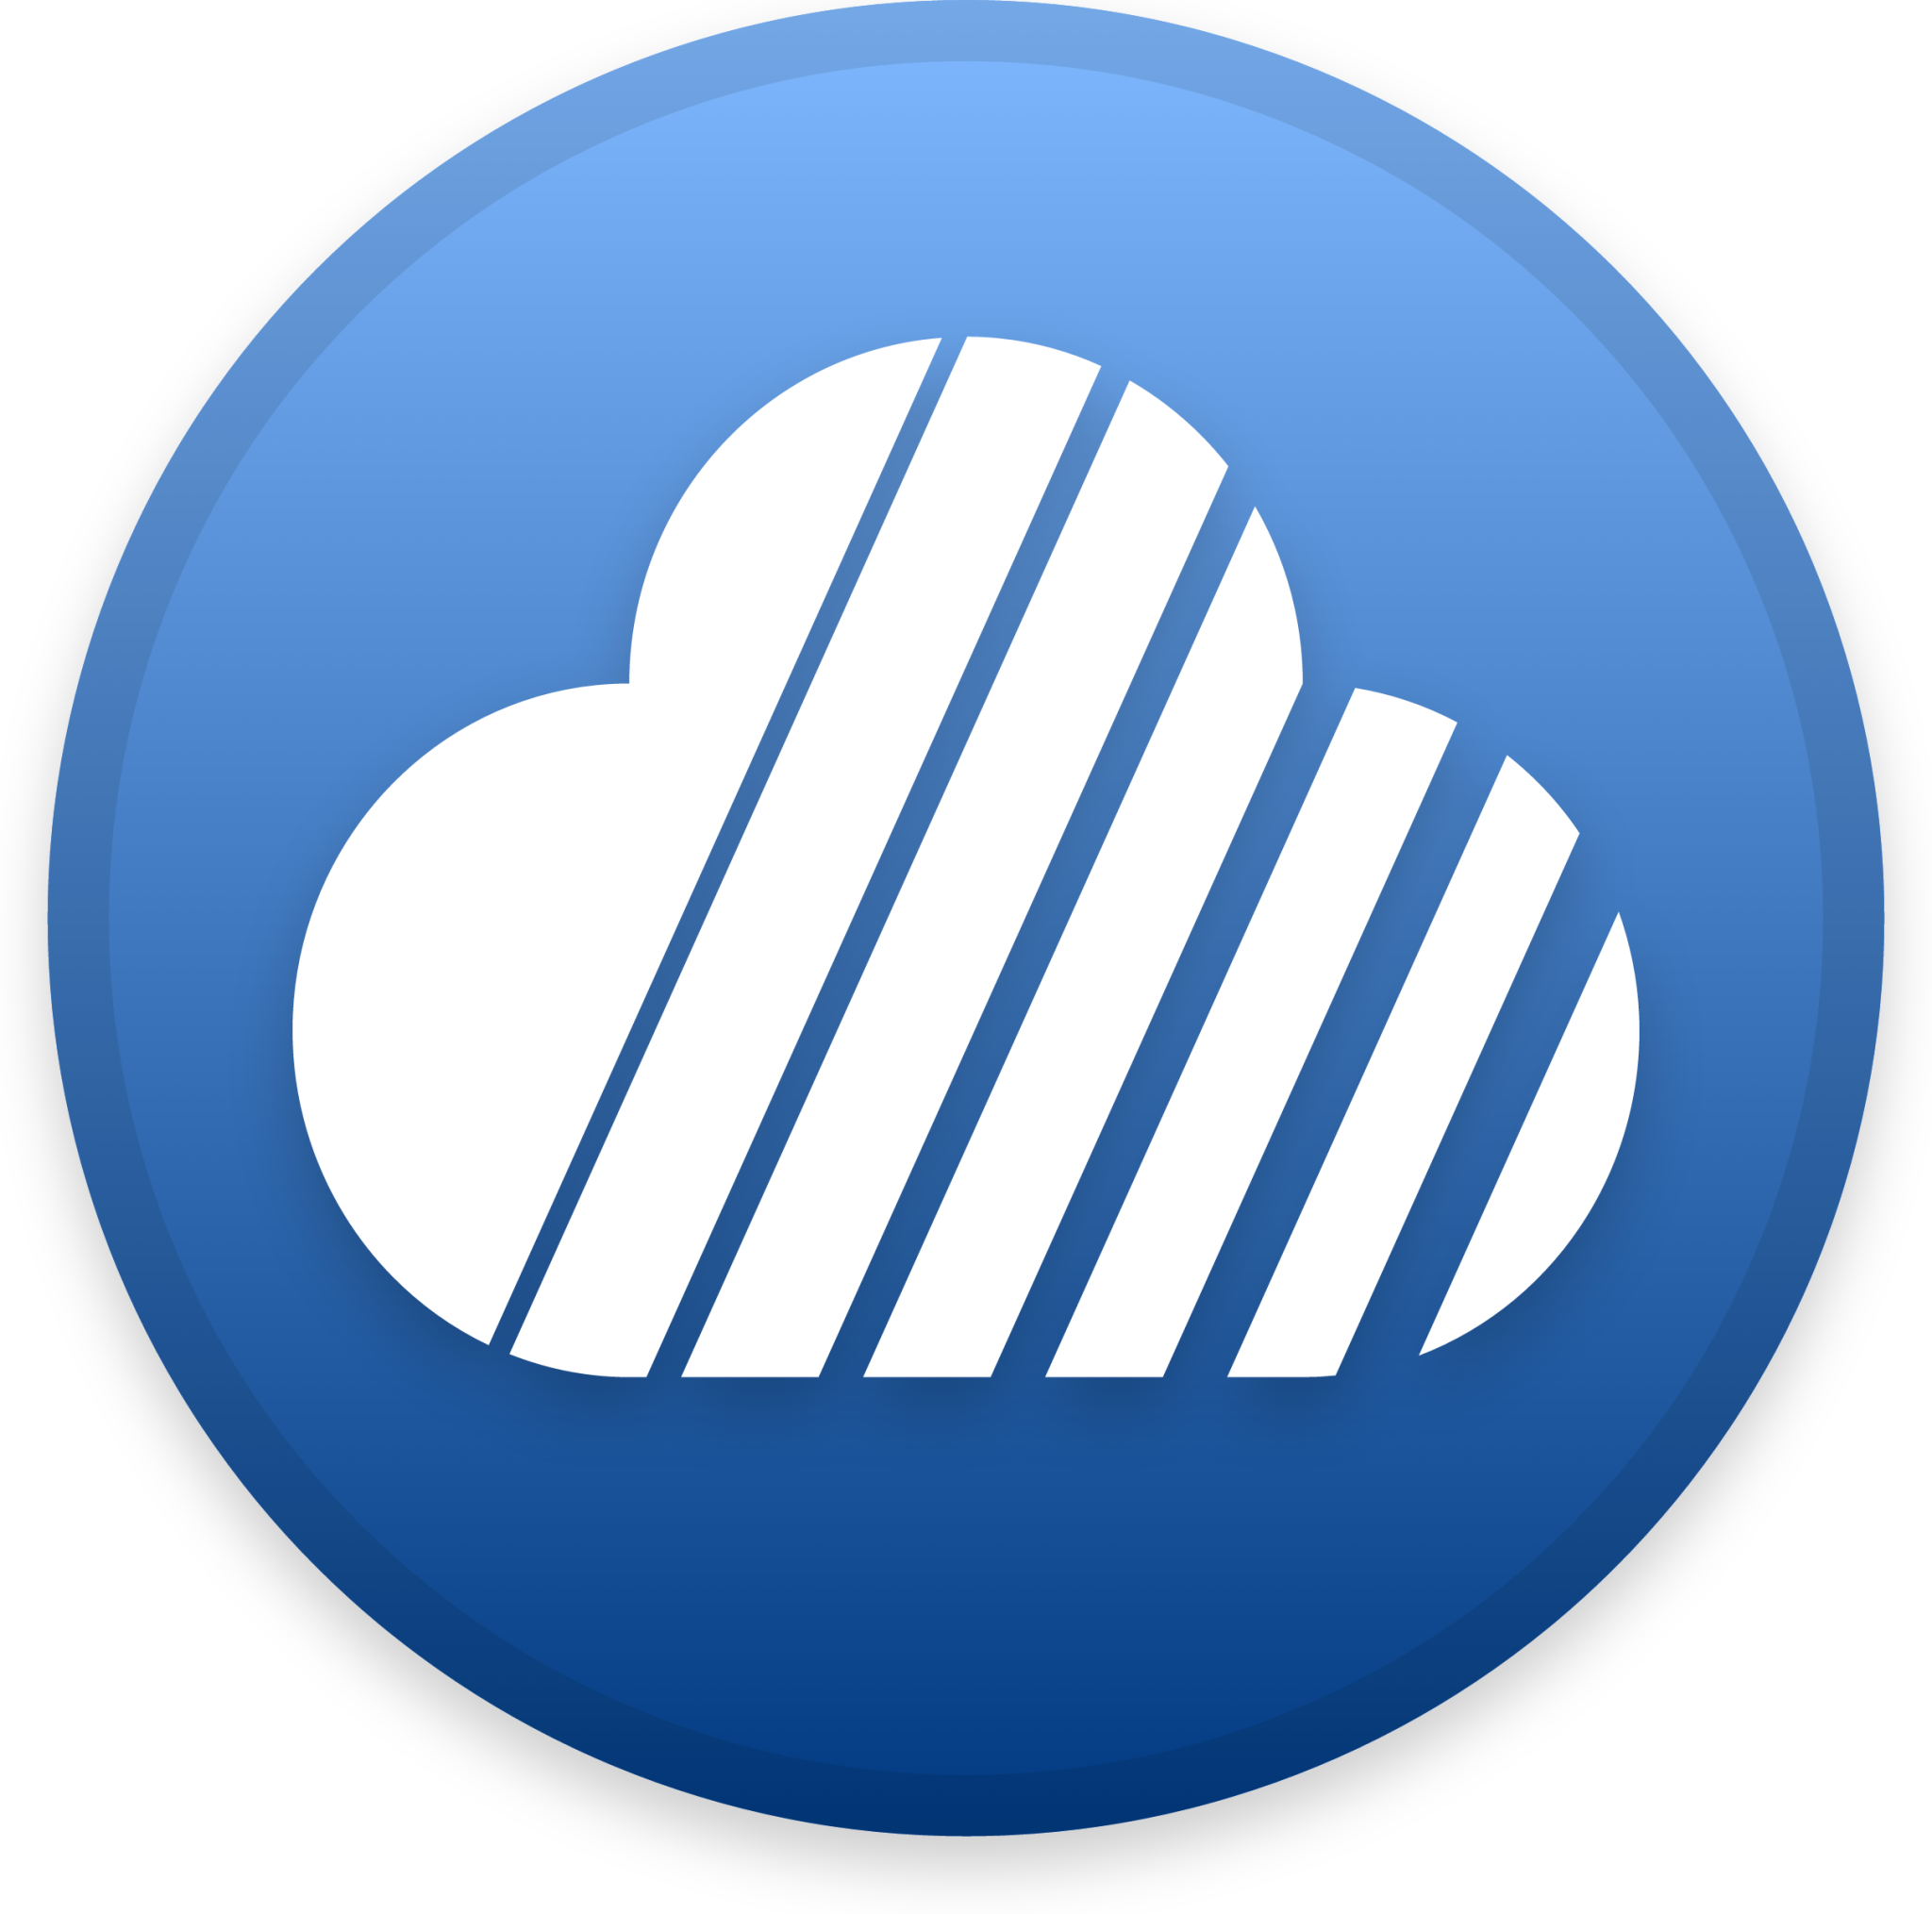 Skycoin Cryptocurrency icon